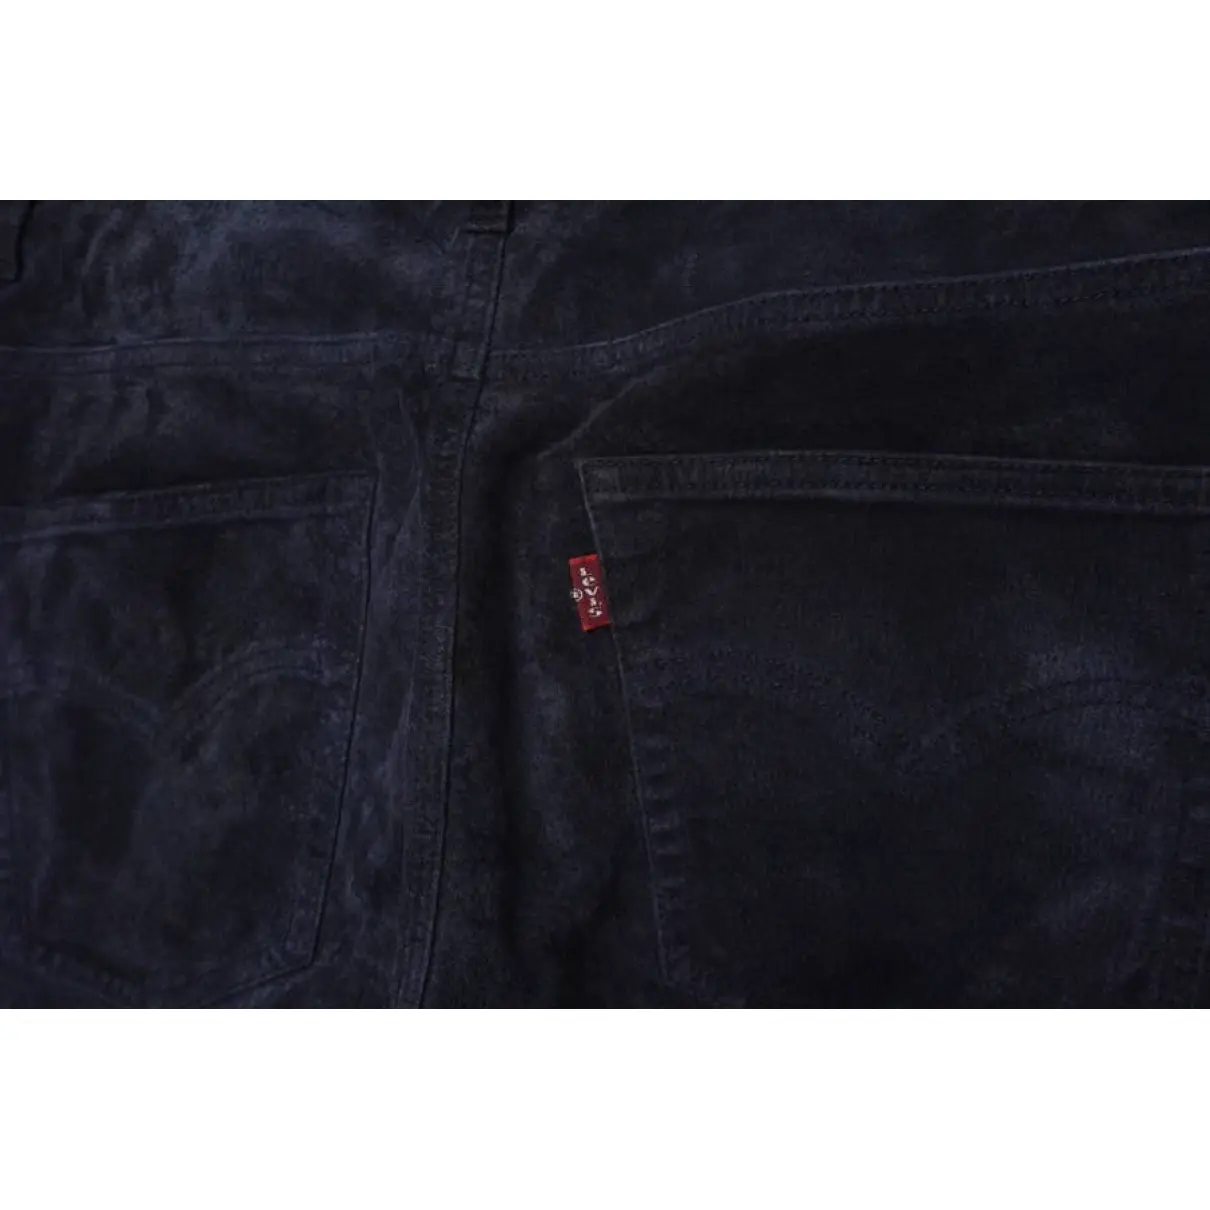 Leather trousers Levi's Vintage Clothing